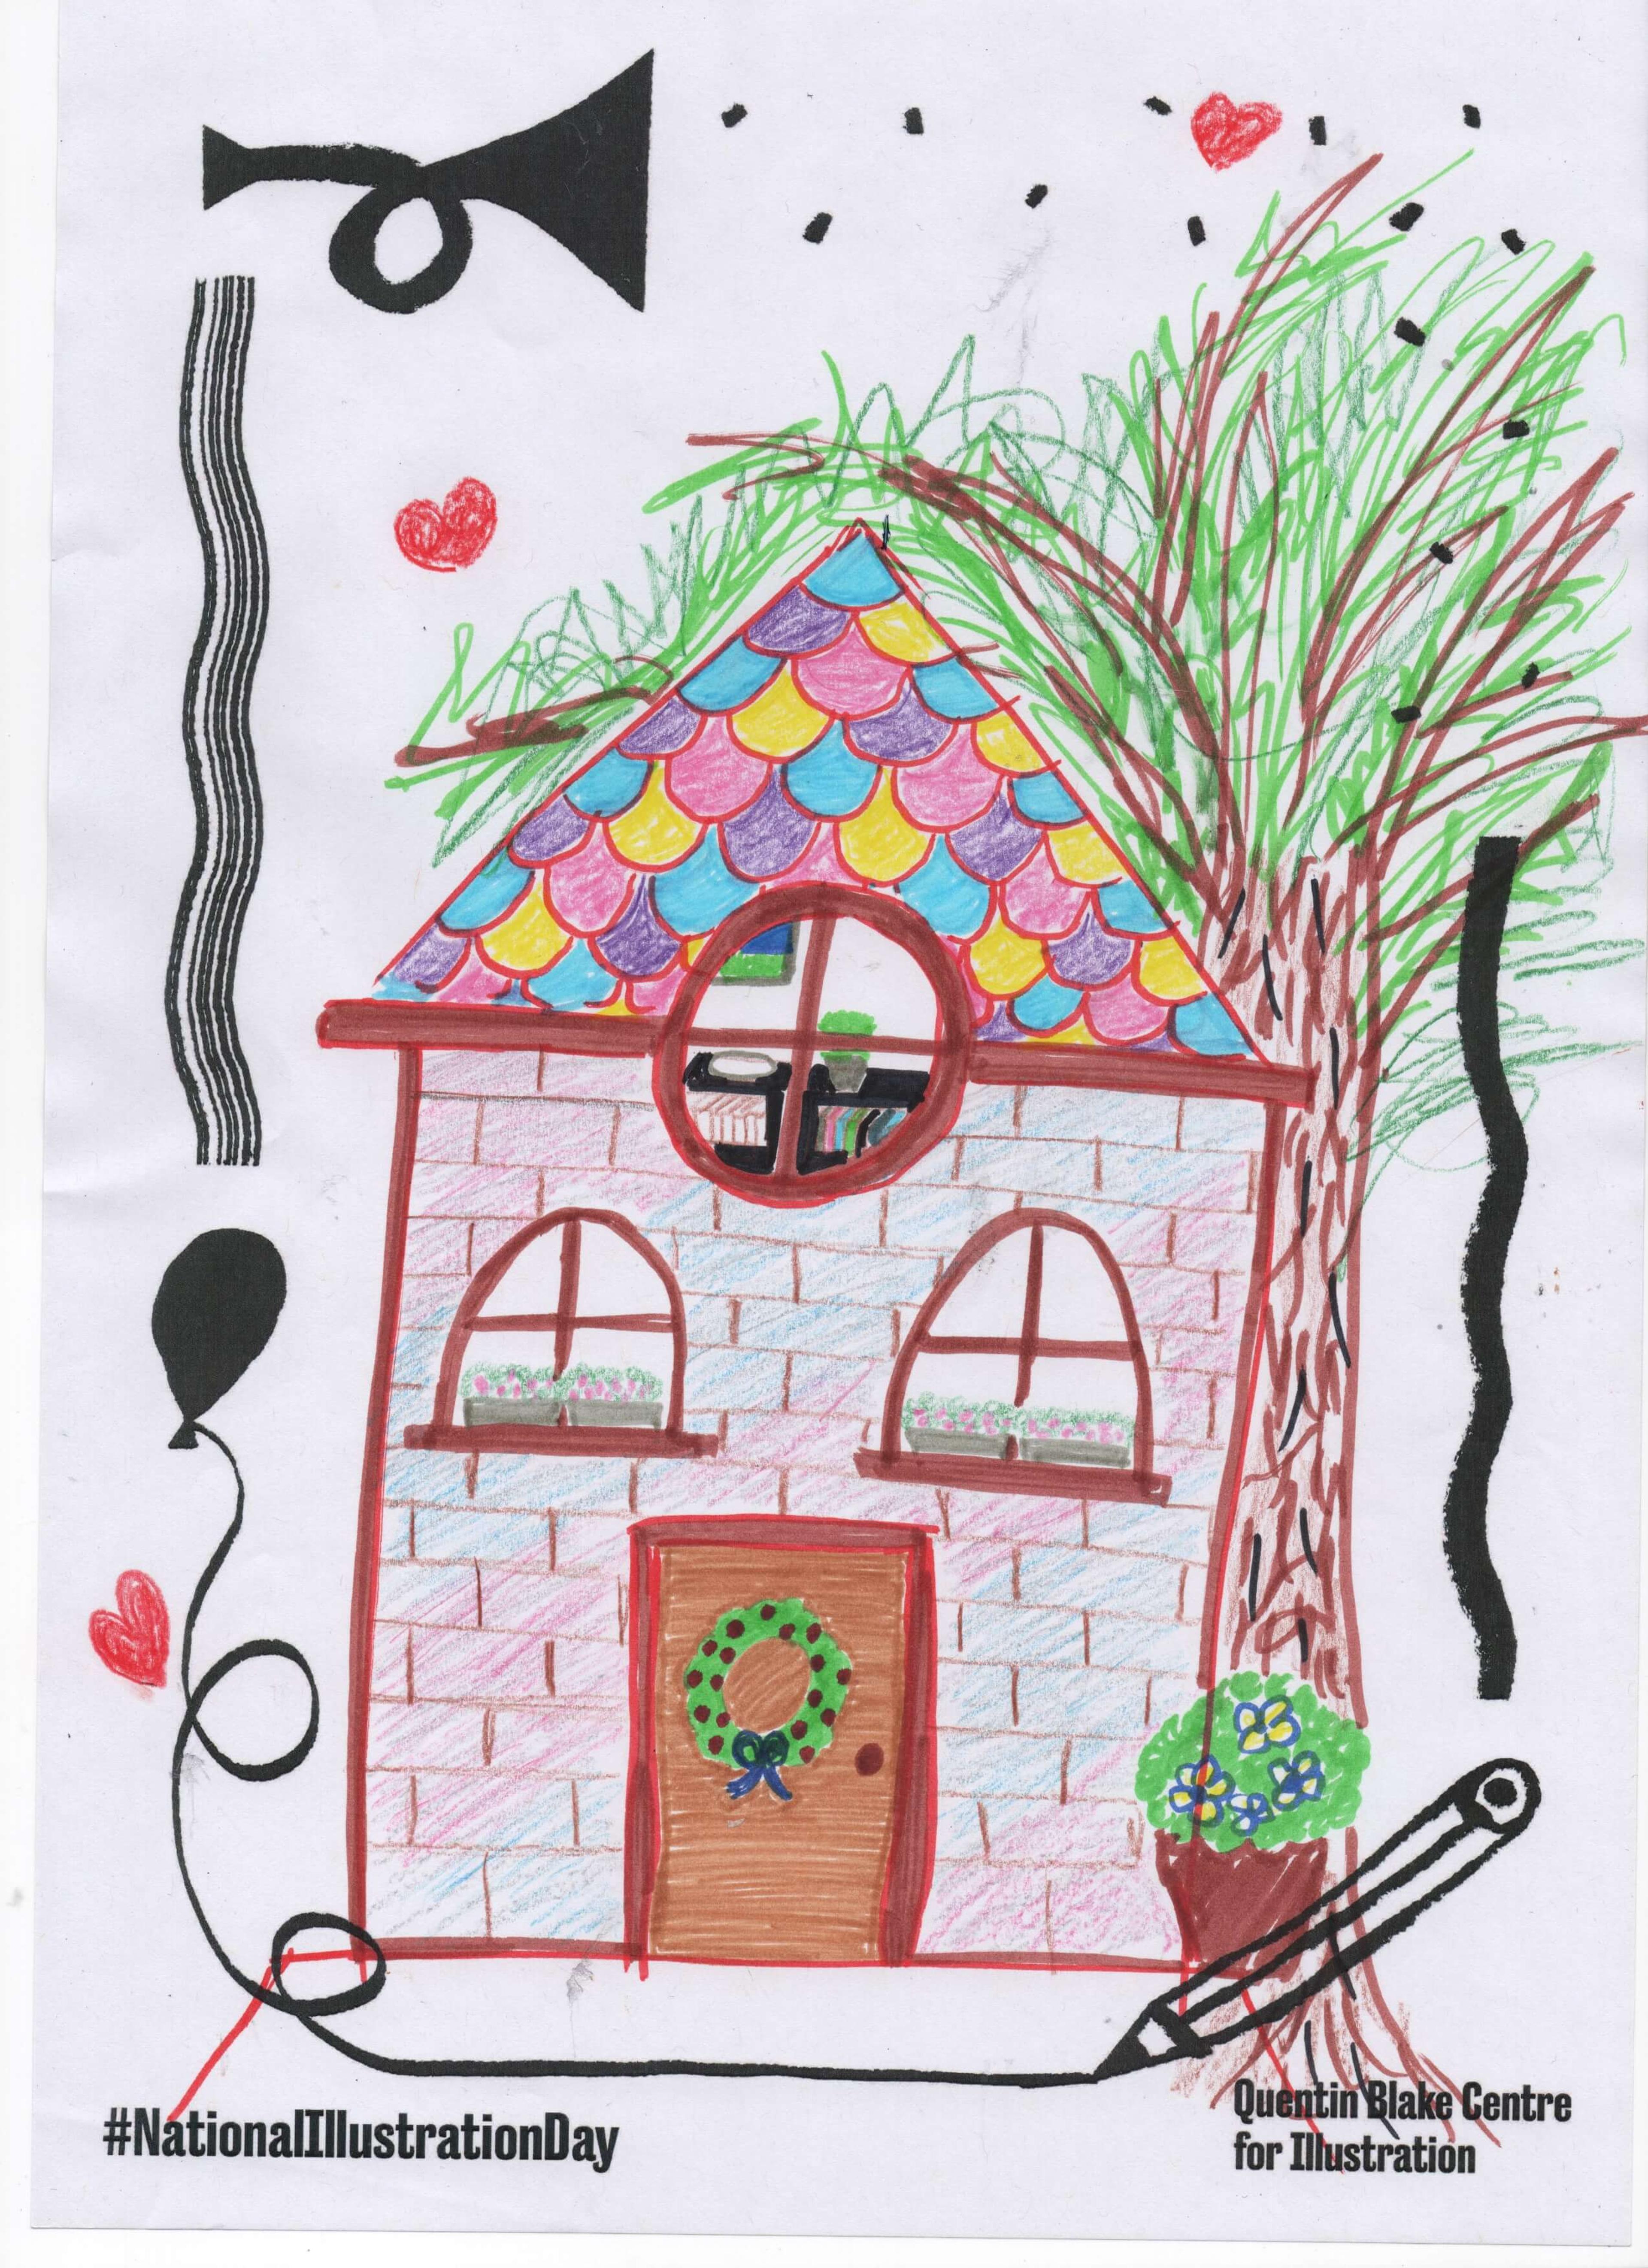 Illustration of a pink brick house with a colourful roof. We also see a wreath on the front door and a big, leafy tree next to the house. 